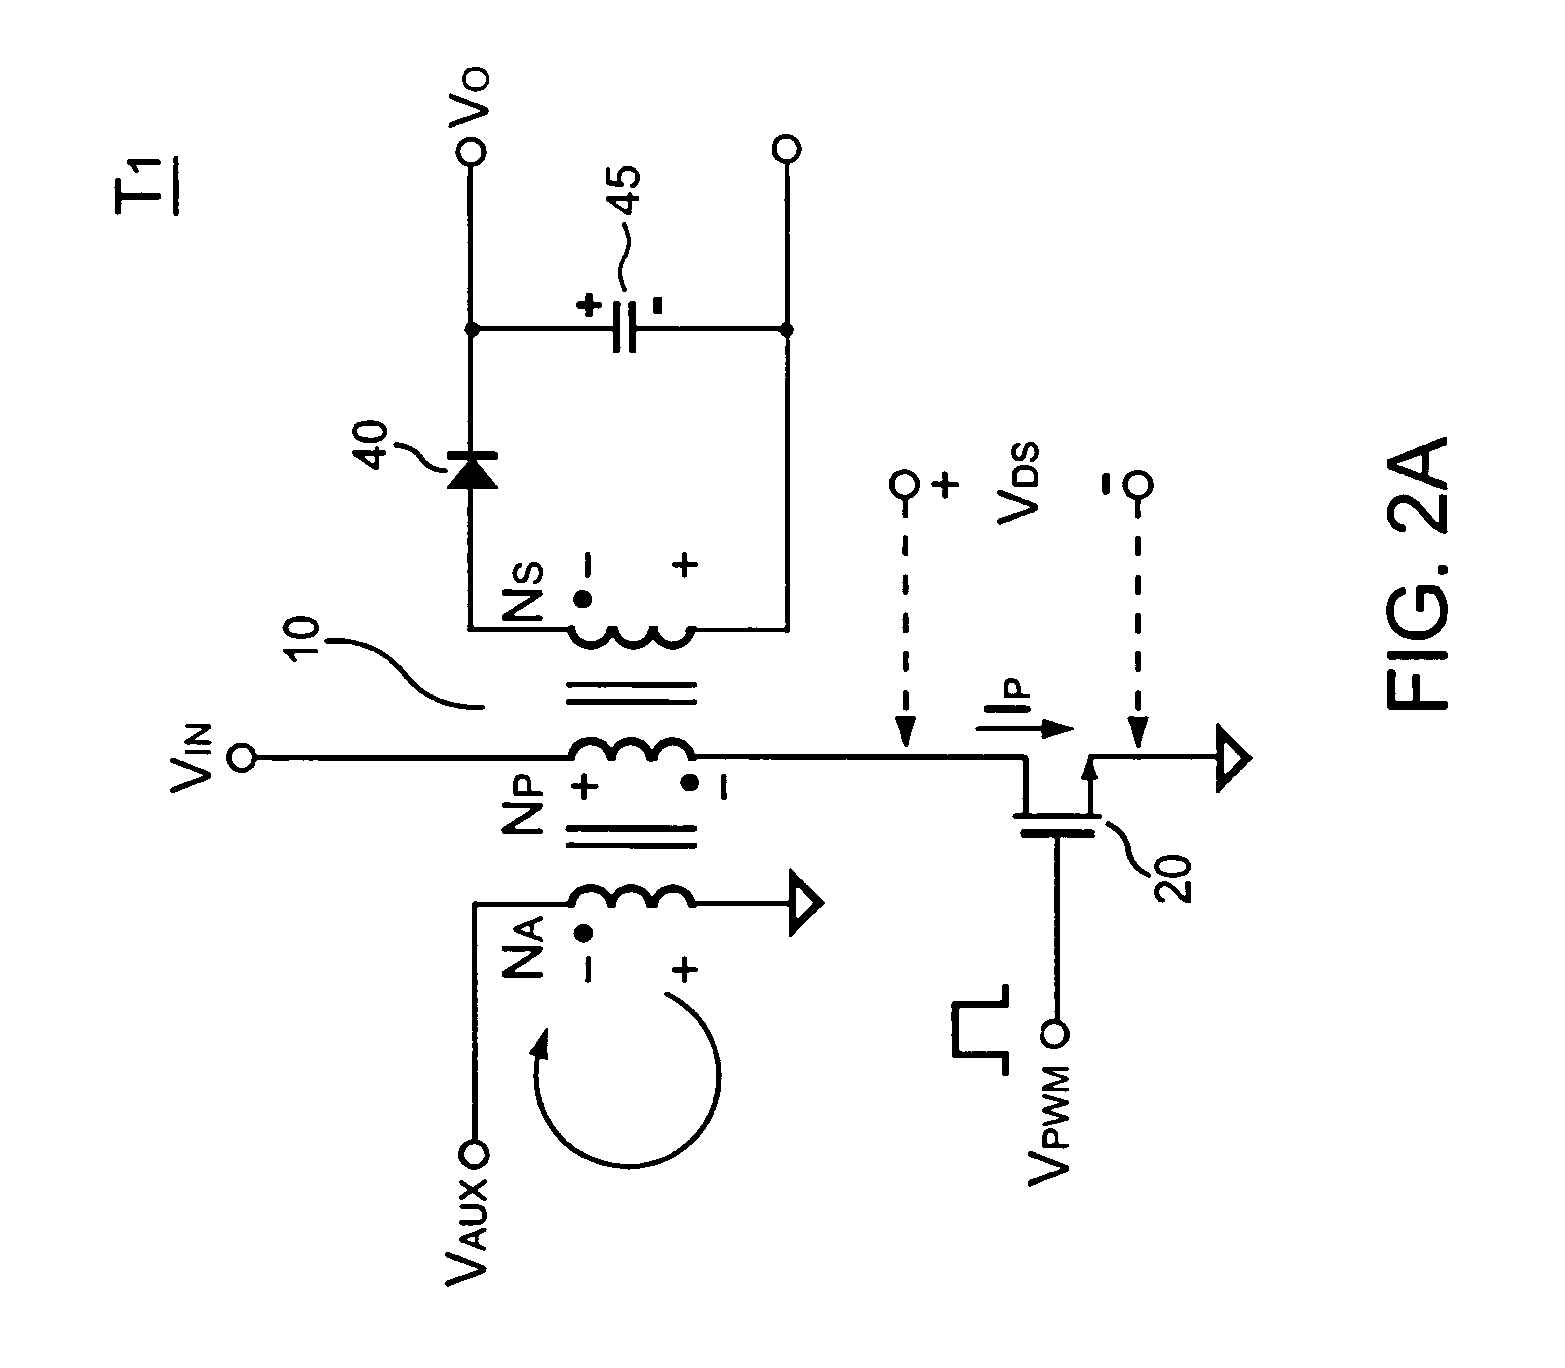 Multiple-sampling circuit for measuring reflected voltage and discharge time of a transformer